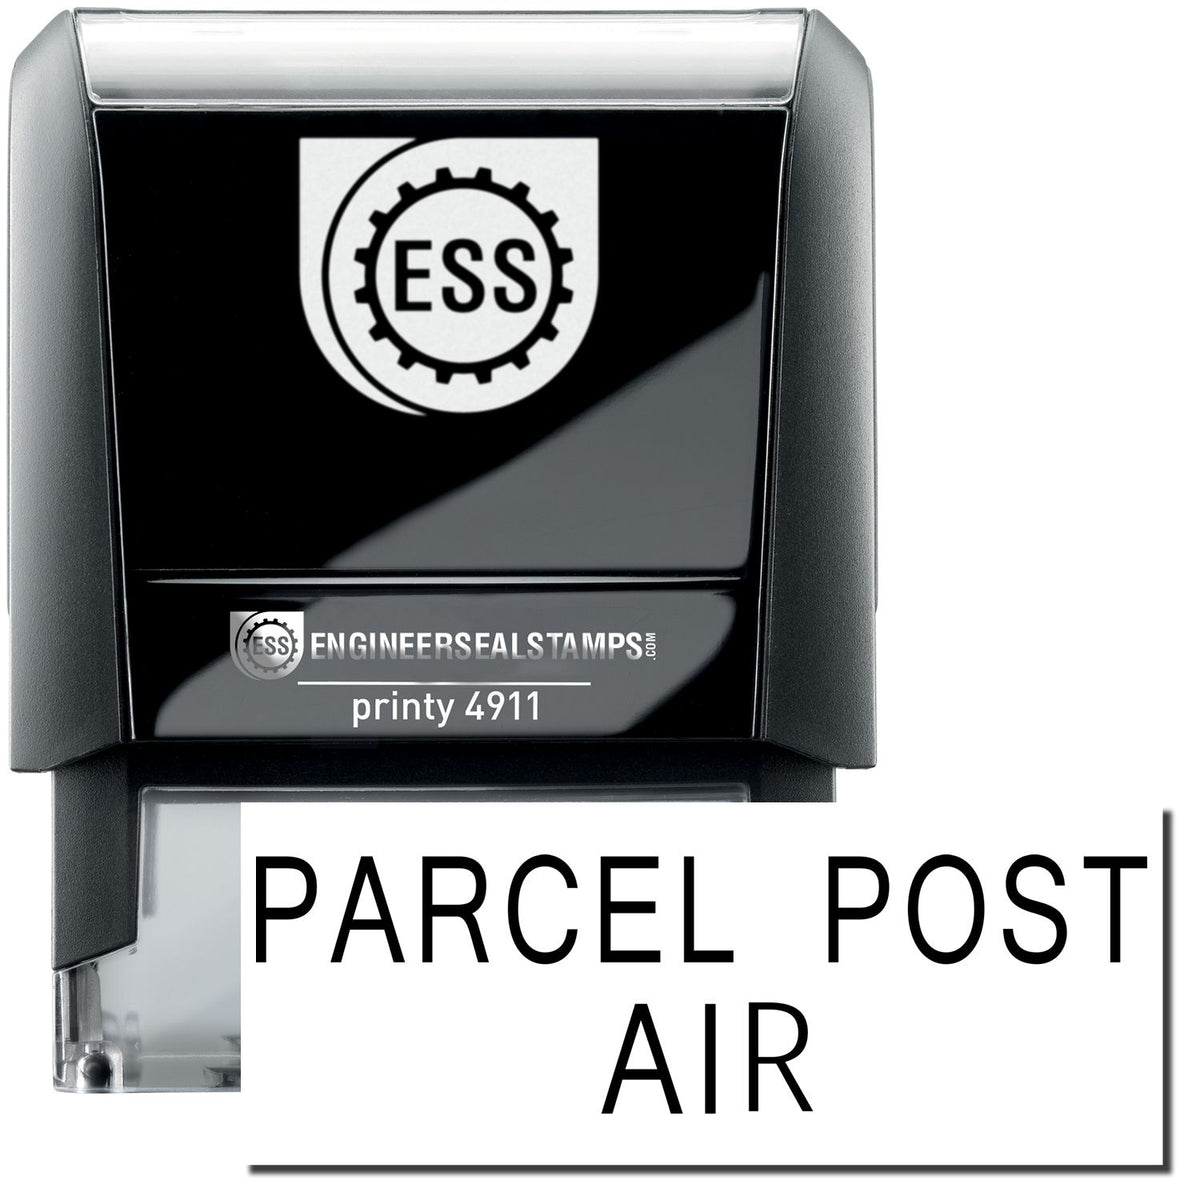 A self-inking stamp with a stamped image showing how the text &quot;PARCEL POST AIR&quot; is displayed after stamping.